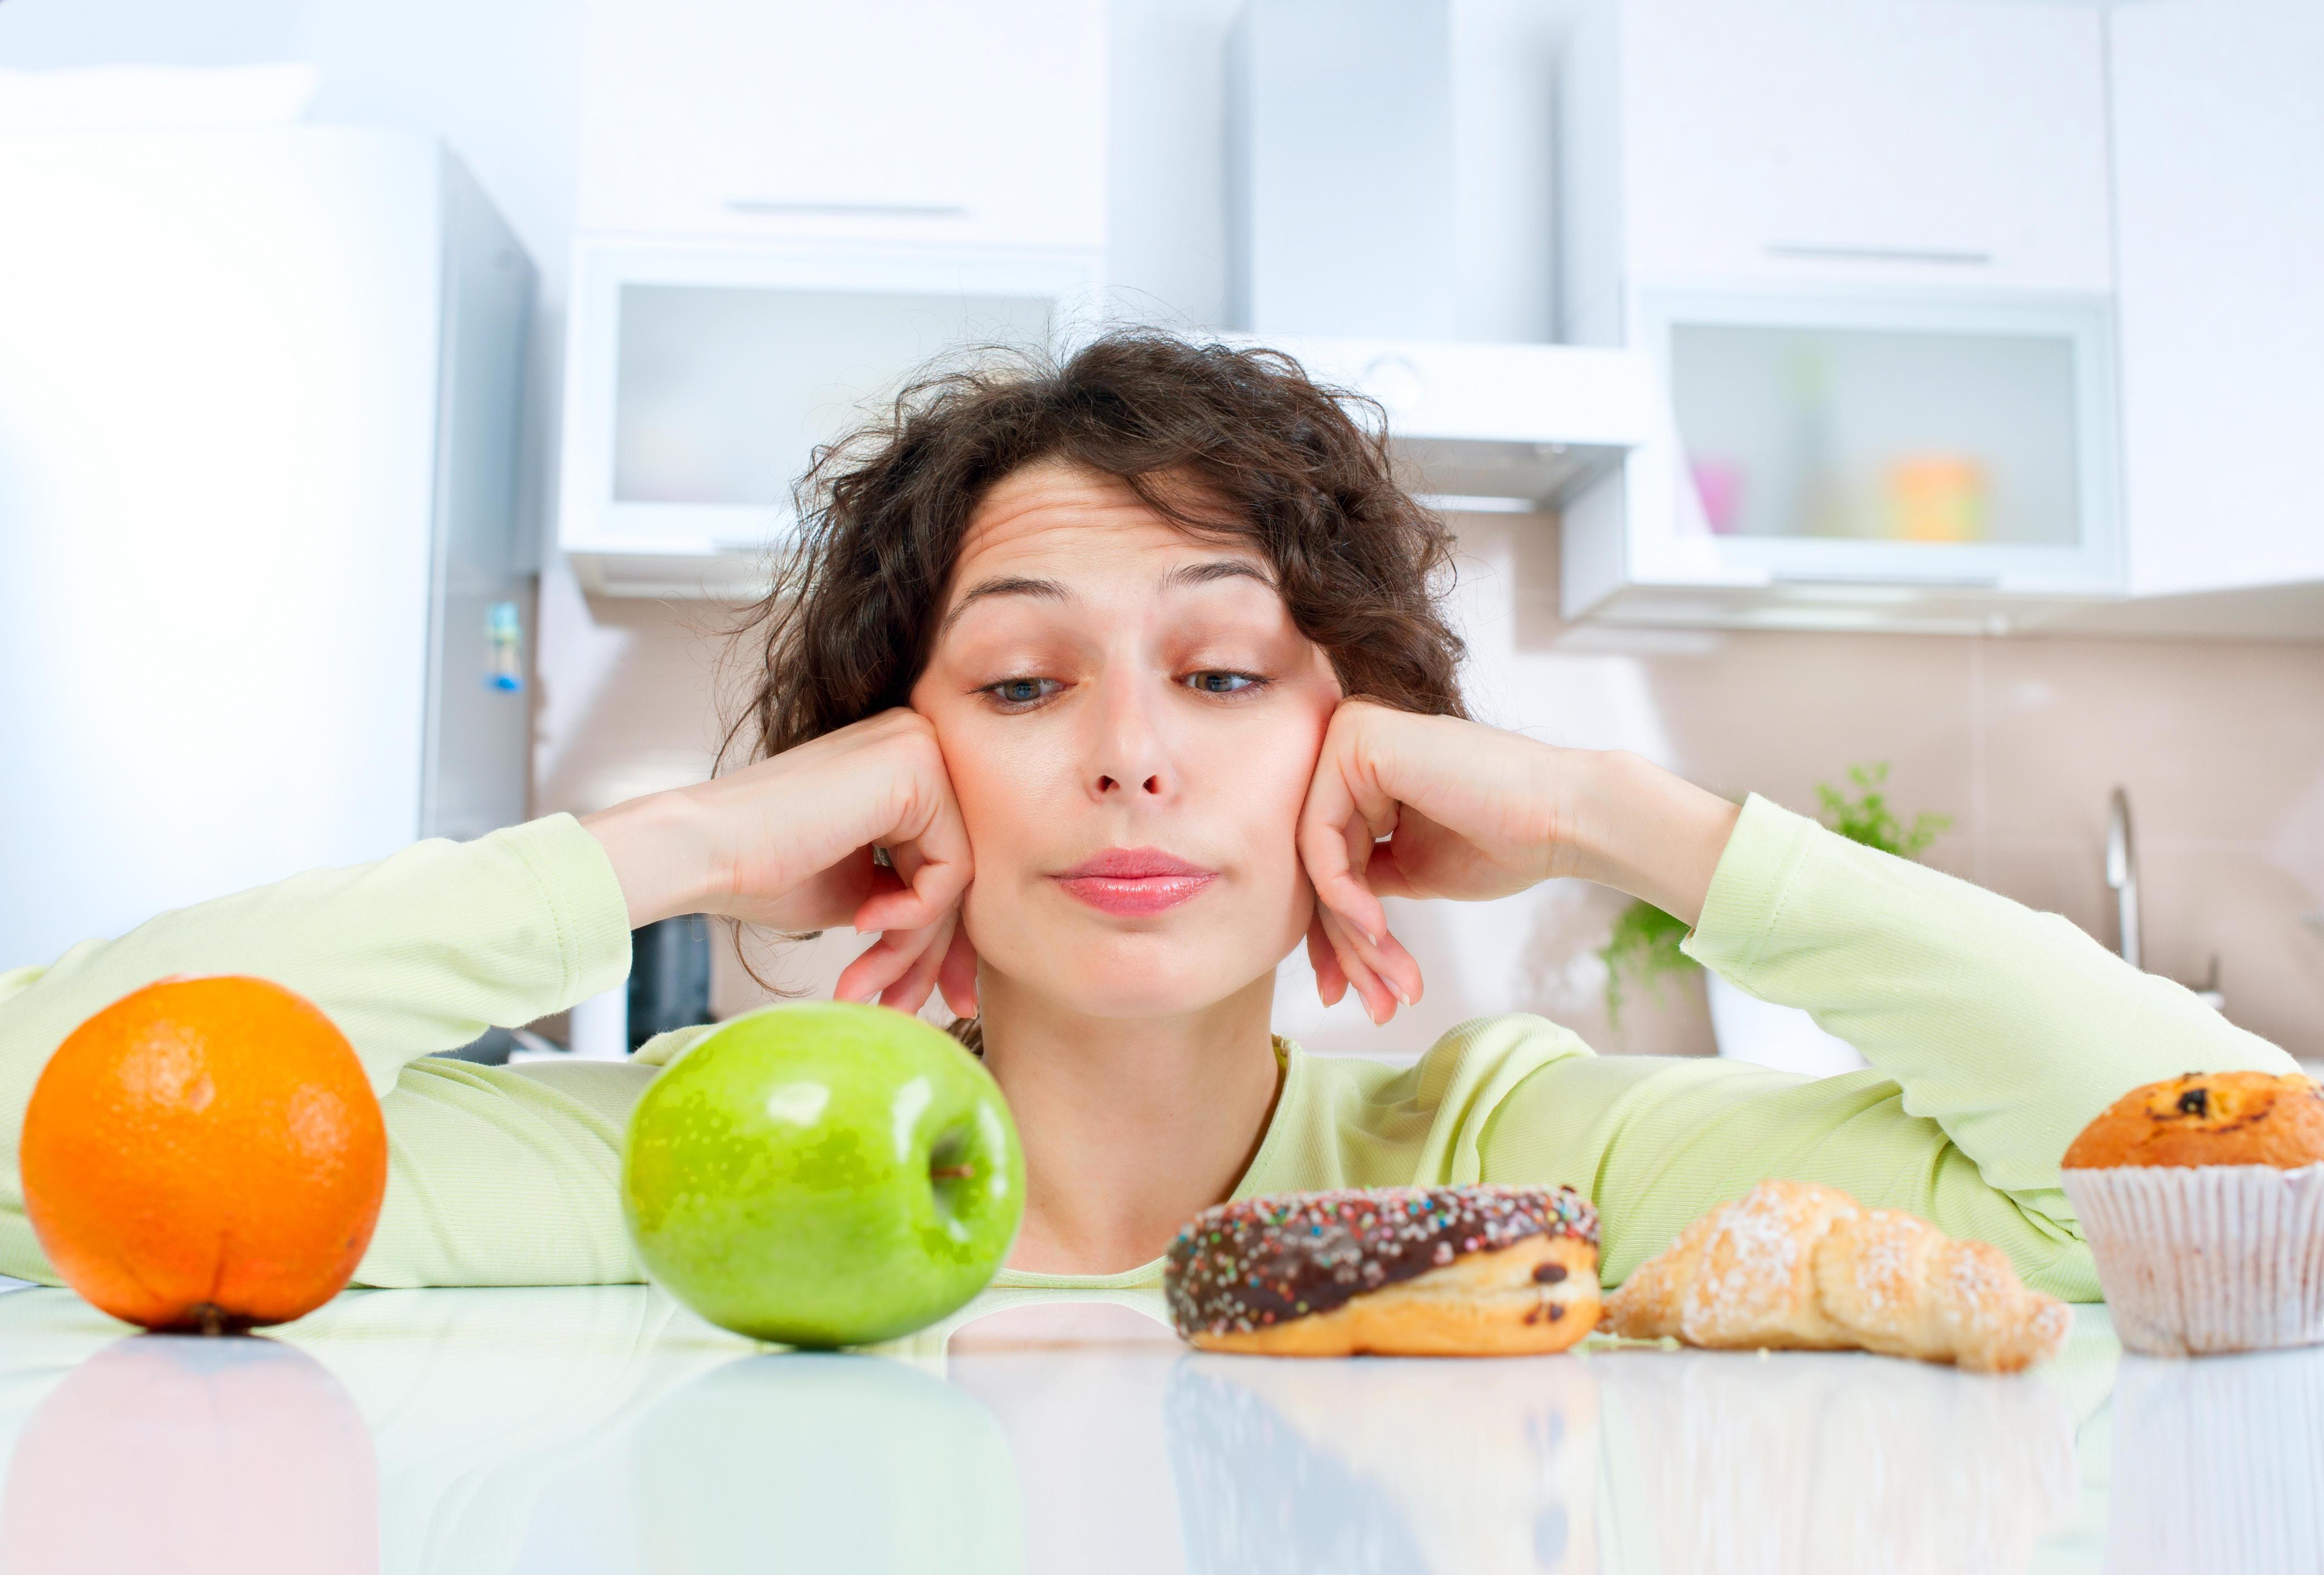 How to STOP Hunger Cravings While Dieting - HerbaChoices